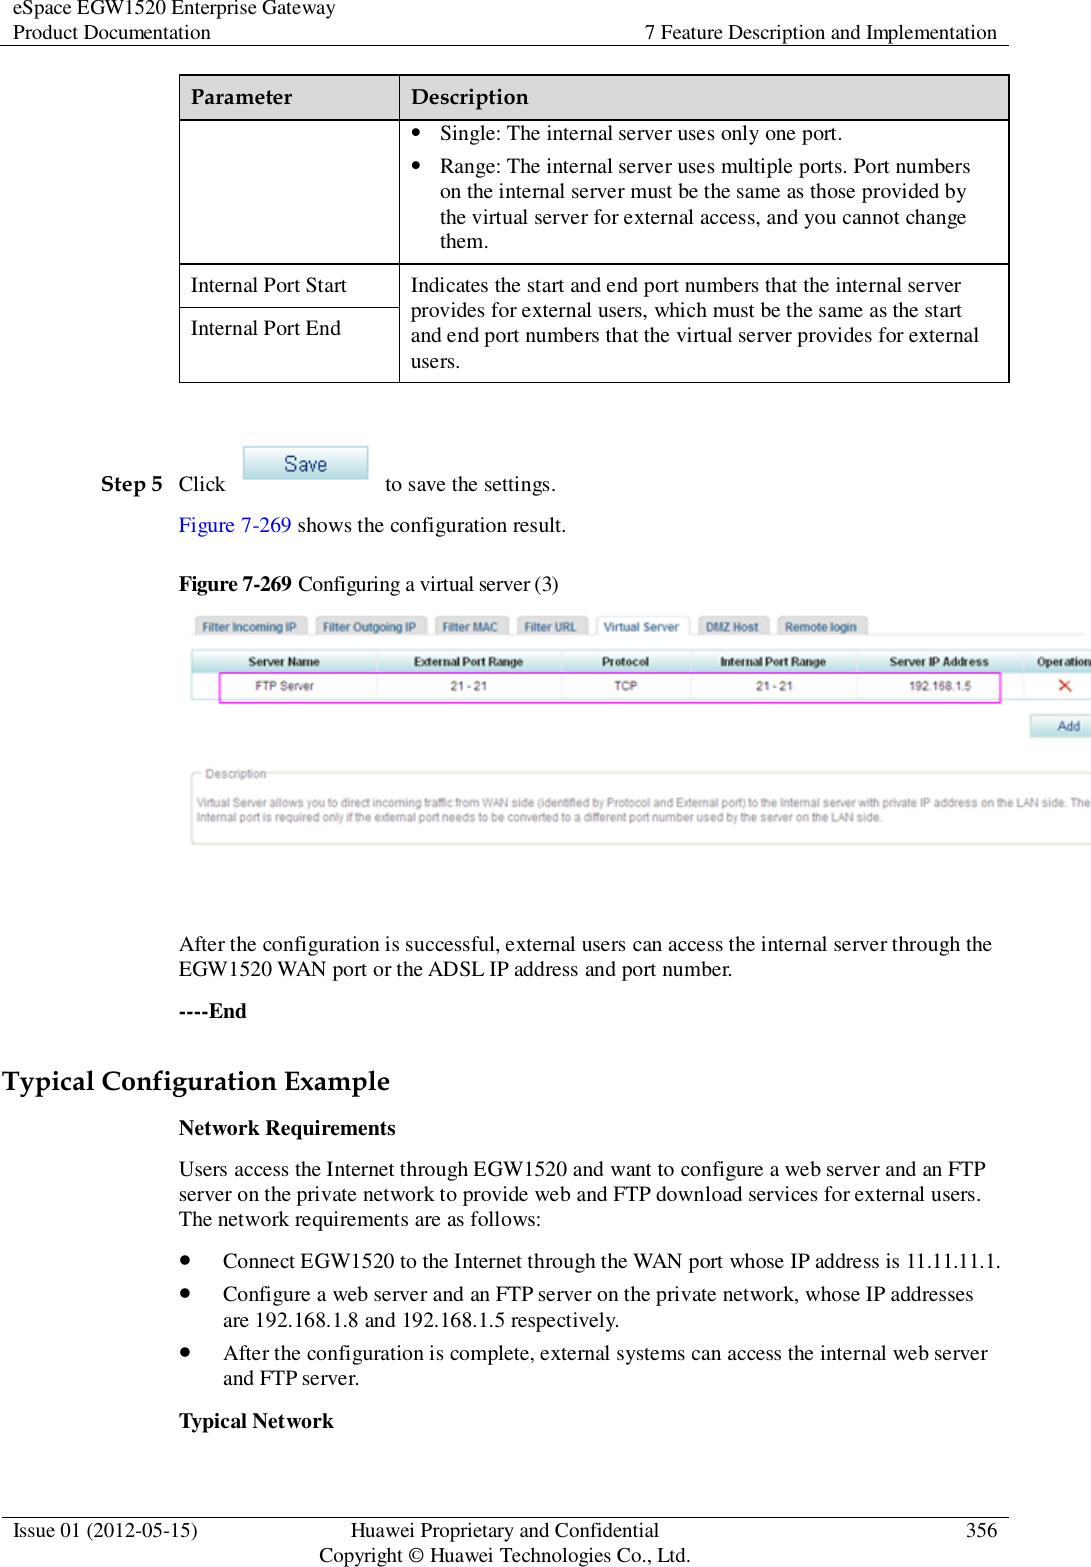 eSpace EGW1520 Enterprise Gateway Product Documentation 7 Feature Description and Implementation  Issue 01 (2012-05-15) Huawei Proprietary and Confidential                                     Copyright © Huawei Technologies Co., Ltd. 356  Parameter Description  Single: The internal server uses only one port.  Range: The internal server uses multiple ports. Port numbers on the internal server must be the same as those provided by the virtual server for external access, and you cannot change them. Internal Port Start Indicates the start and end port numbers that the internal server provides for external users, which must be the same as the start and end port numbers that the virtual server provides for external users. Internal Port End  Step 5 Click    to save the settings. Figure 7-269 shows the configuration result. Figure 7-269 Configuring a virtual server (3)   After the configuration is successful, external users can access the internal server through the EGW1520 WAN port or the ADSL IP address and port number. ----End Typical Configuration Example Network Requirements Users access the Internet through EGW1520 and want to configure a web server and an FTP server on the private network to provide web and FTP download services for external users. The network requirements are as follows:  Connect EGW1520 to the Internet through the WAN port whose IP address is 11.11.11.1.  Configure a web server and an FTP server on the private network, whose IP addresses are 192.168.1.8 and 192.168.1.5 respectively.  After the configuration is complete, external systems can access the internal web server and FTP server. Typical Network 